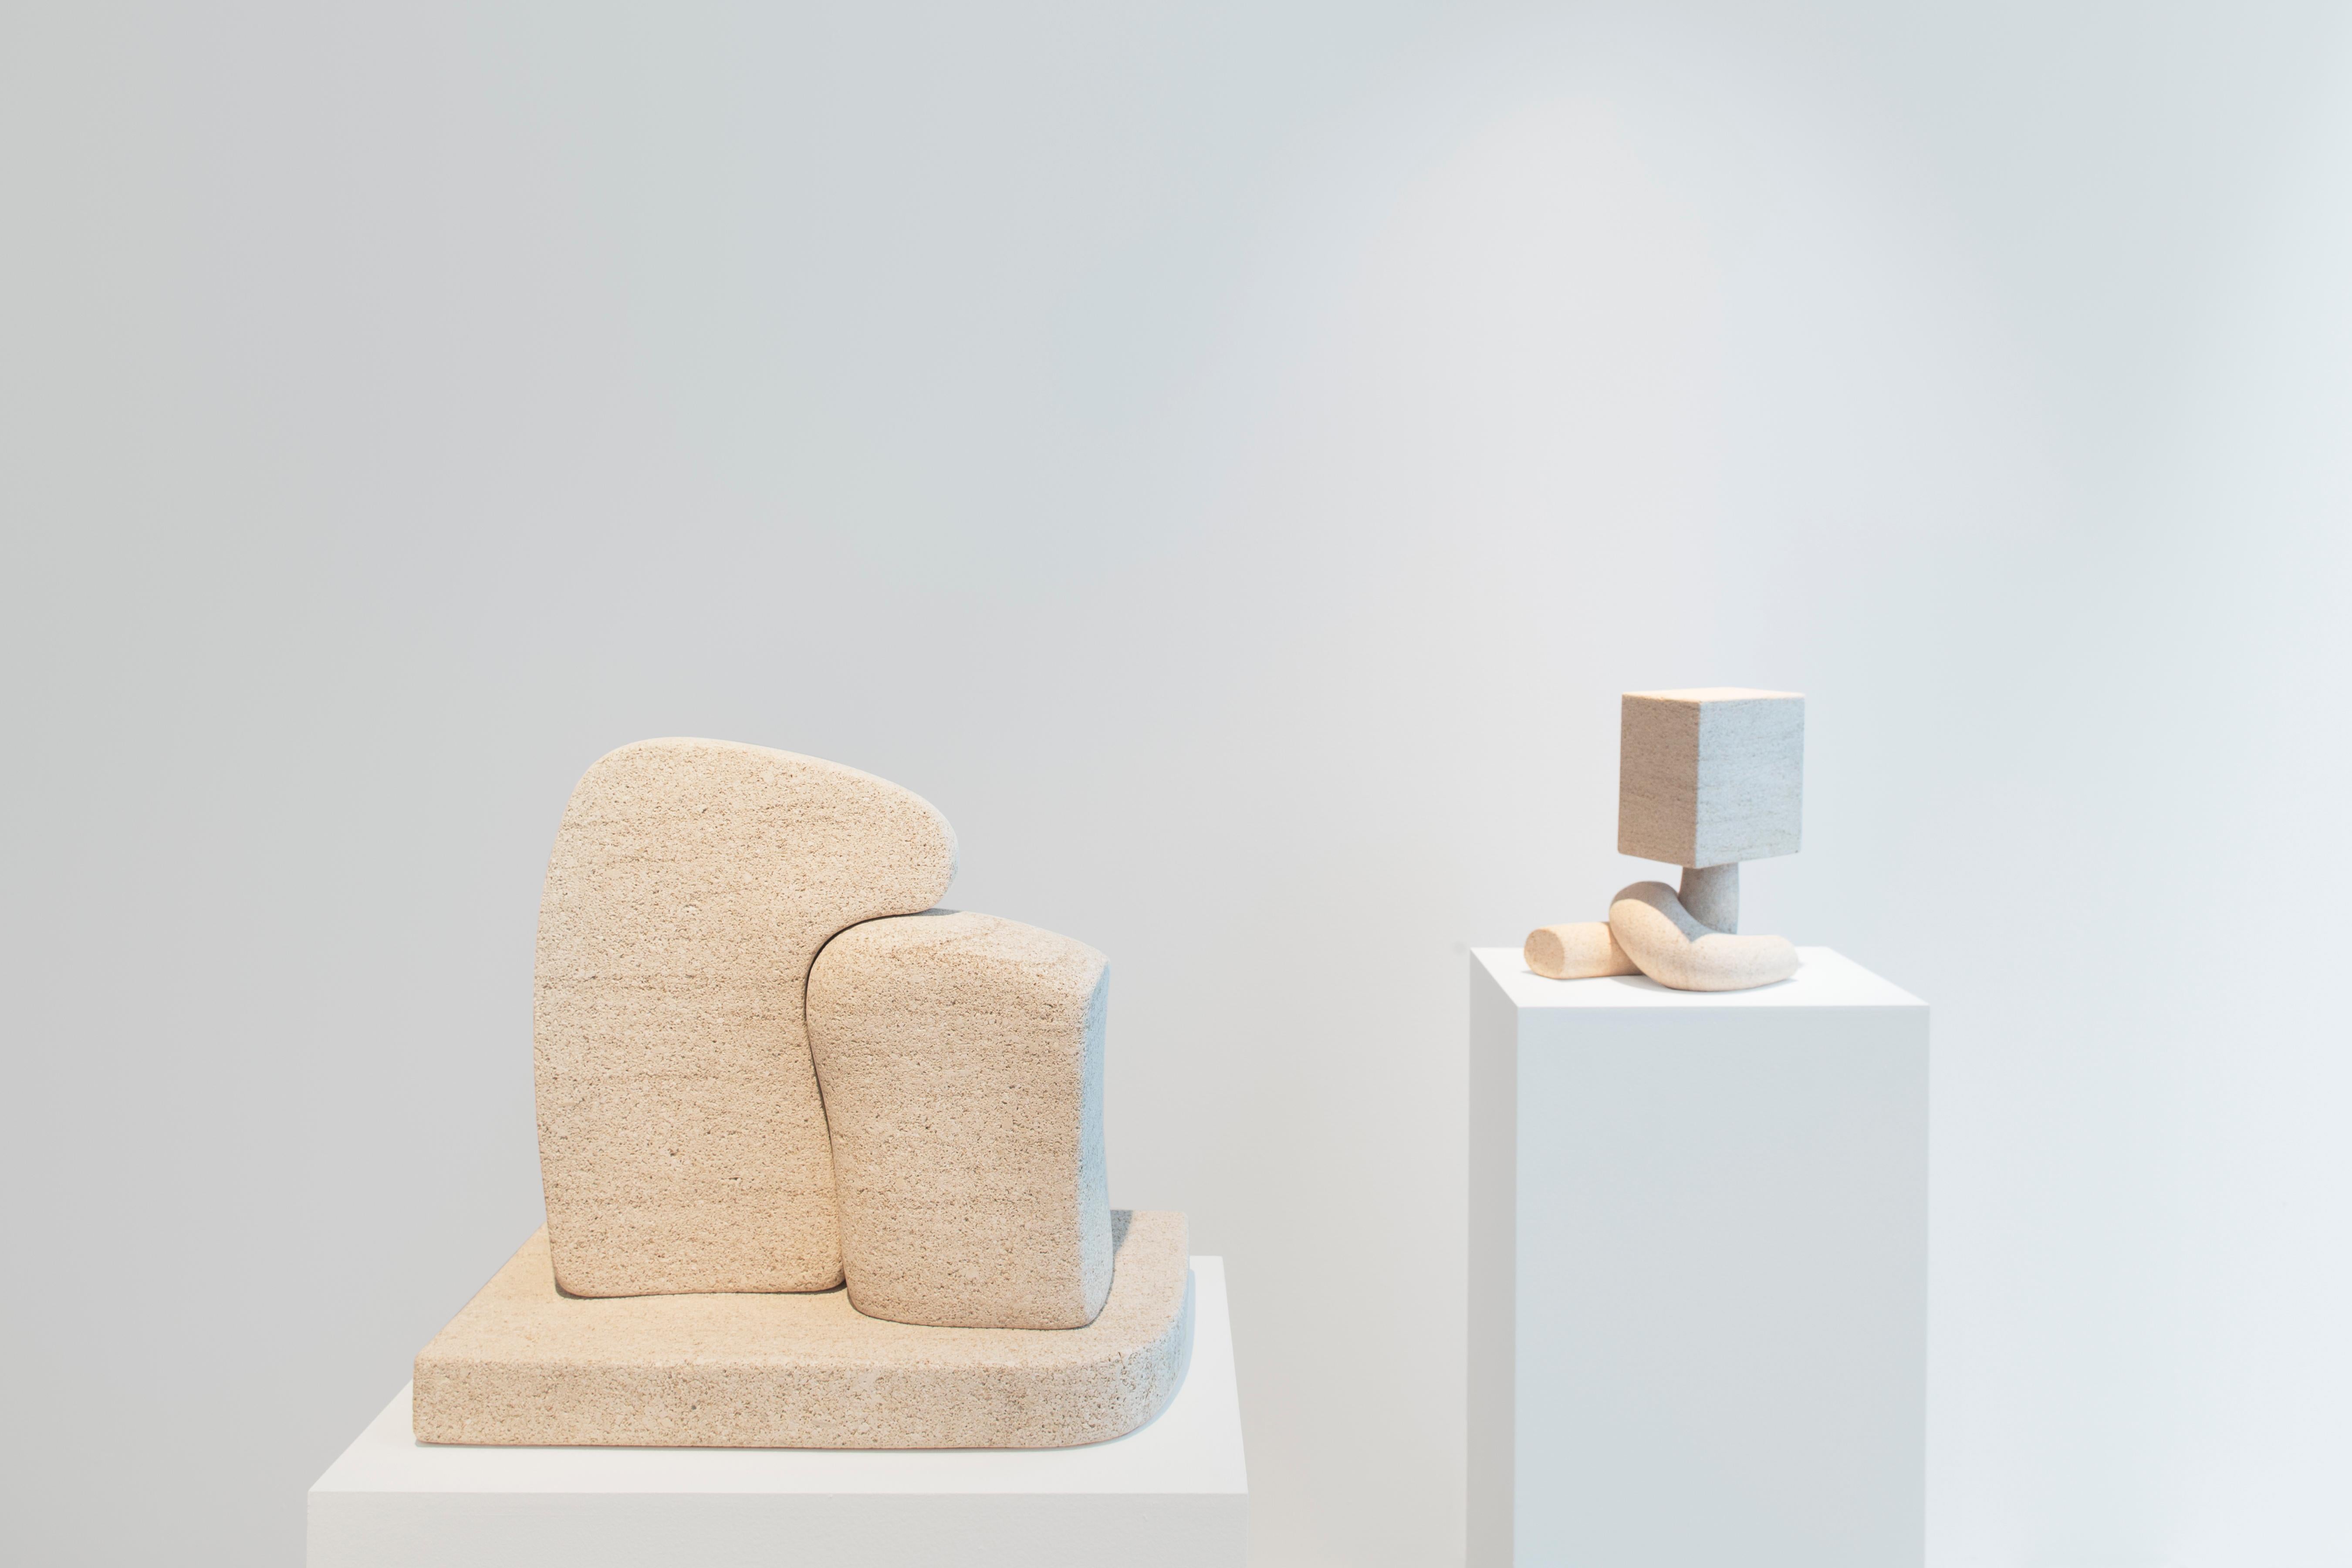 Seduction, pair 05, 2018
Niwala sandstone
Edition of 5
Dimensions: 13 x 12.5 x 8.25 inches; 32.8 x 31.5 x 21 cm.

Najla El Zein’s artworks explore the relationship between form, use, space, and emotion. El Zein’s approach is rooted in her personal